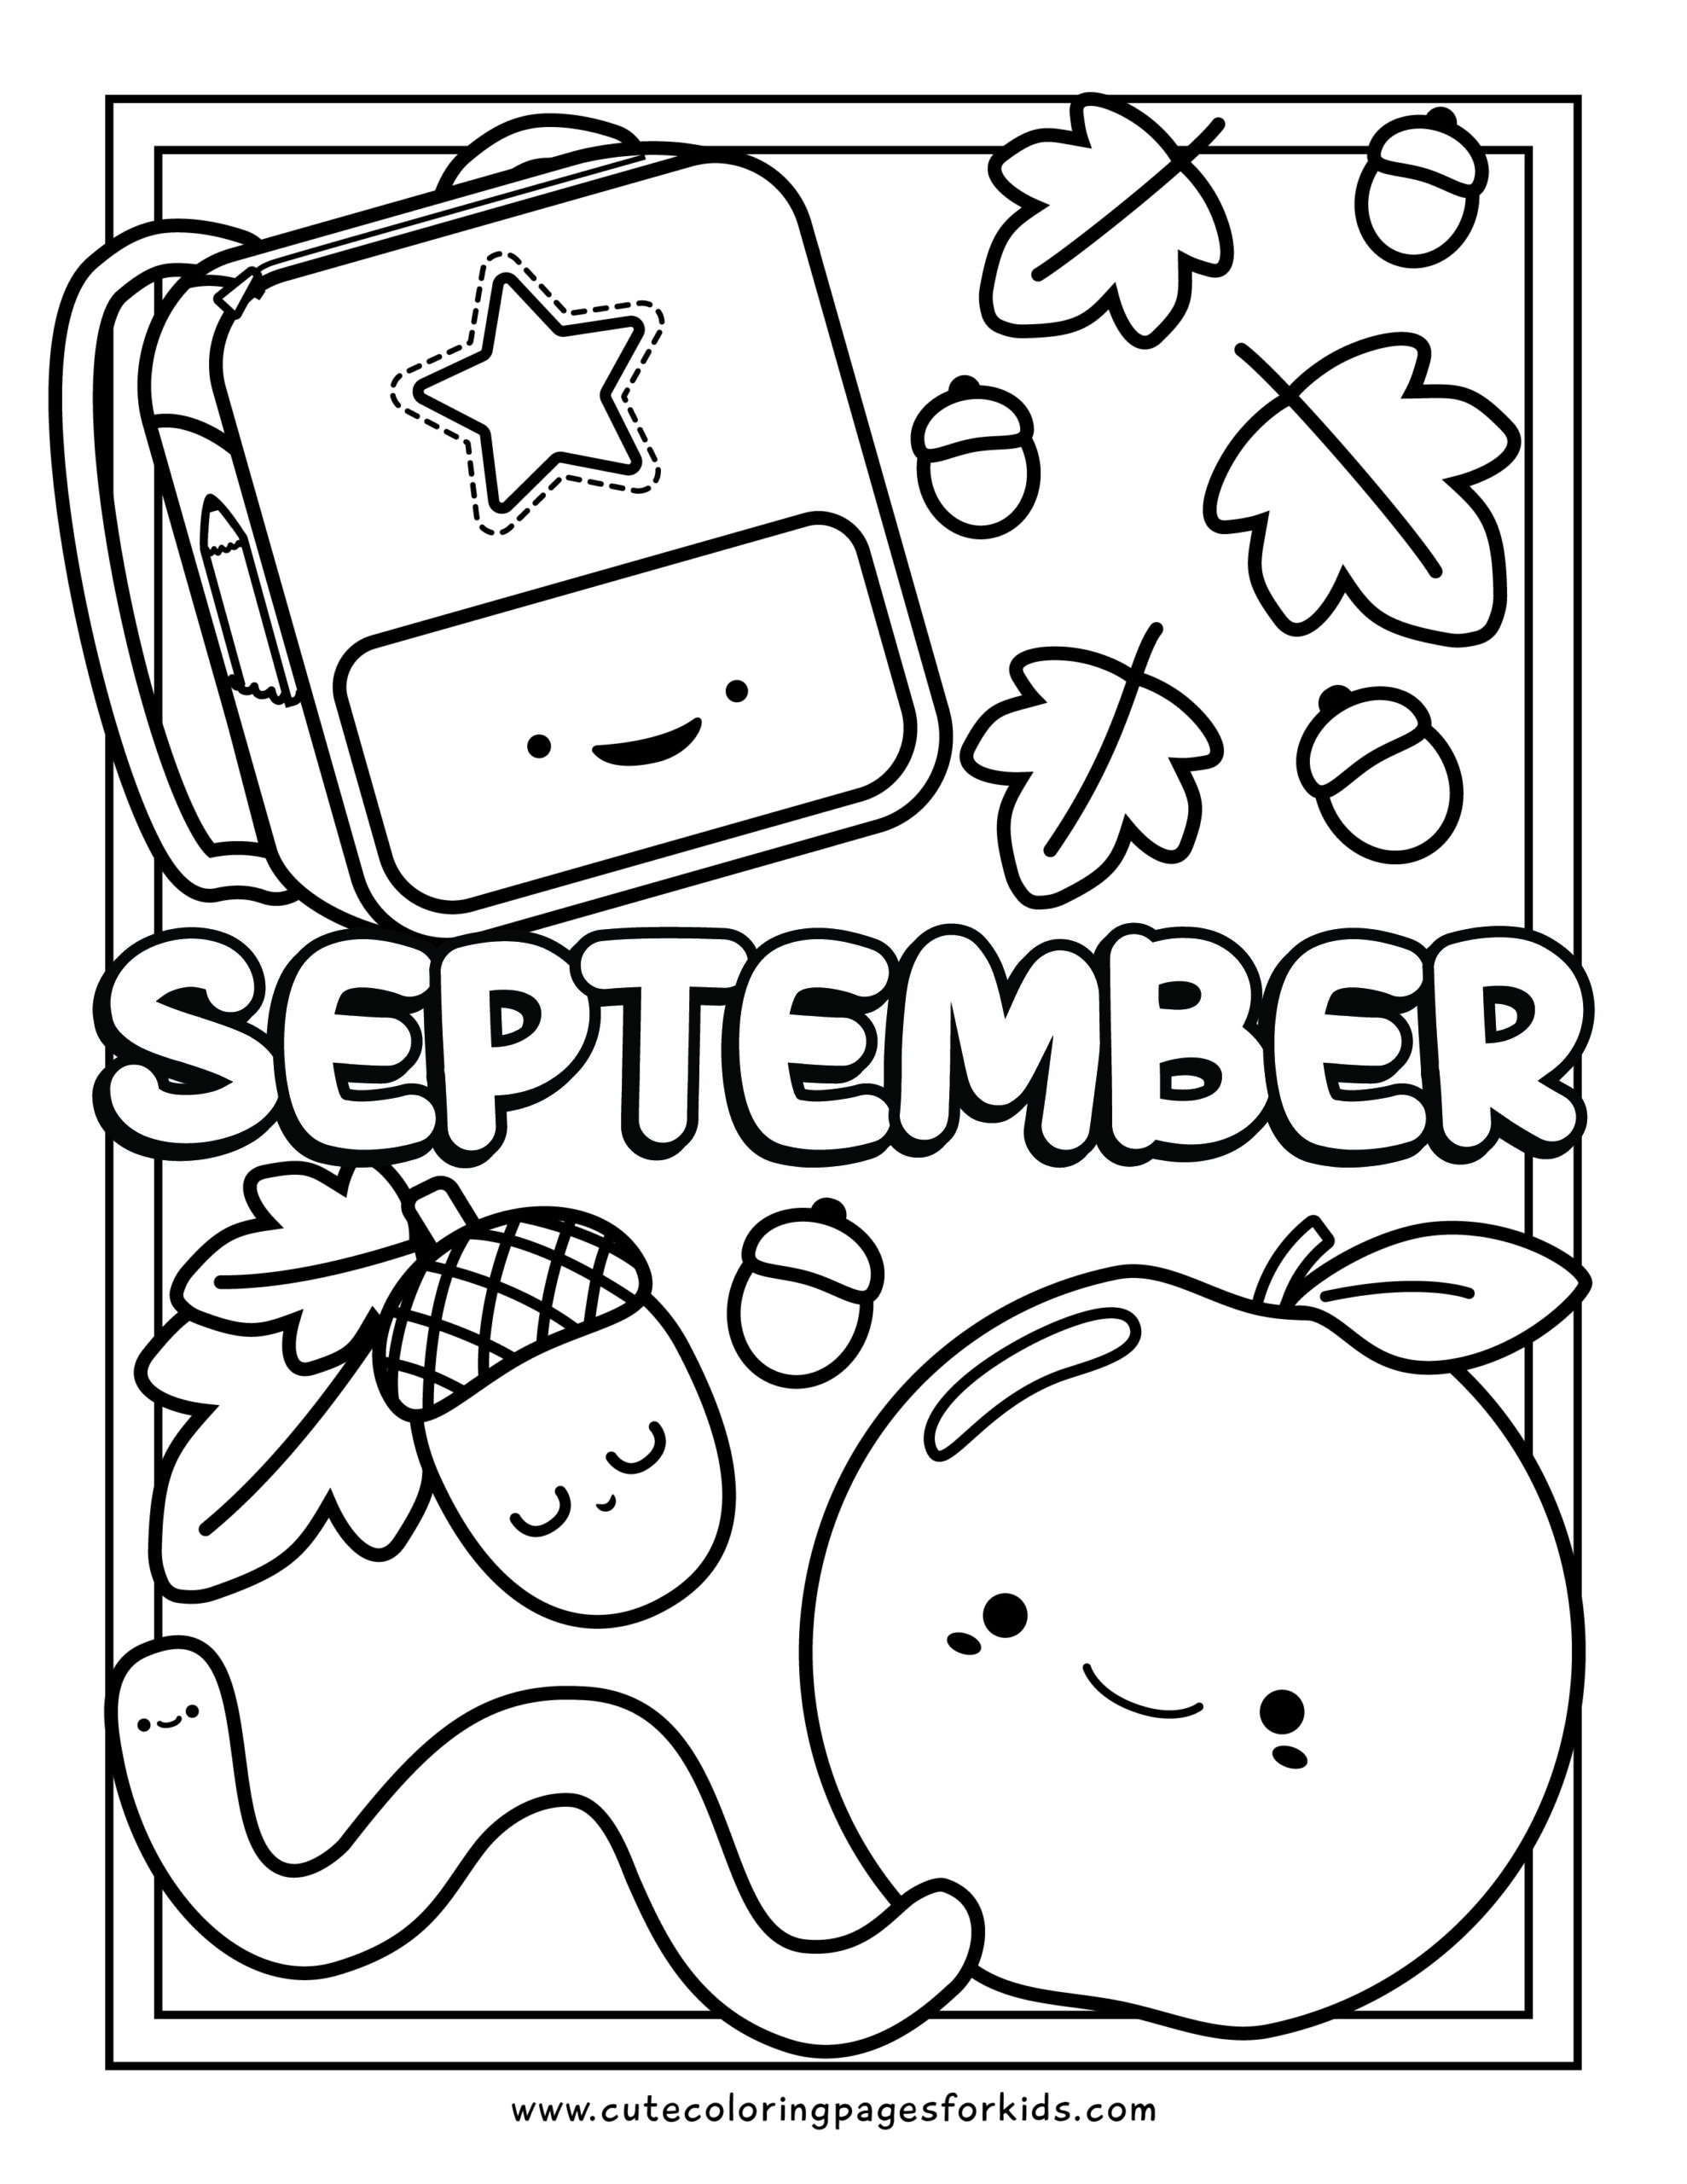 September Coloring Pages - Cute Coloring Pages For Kids